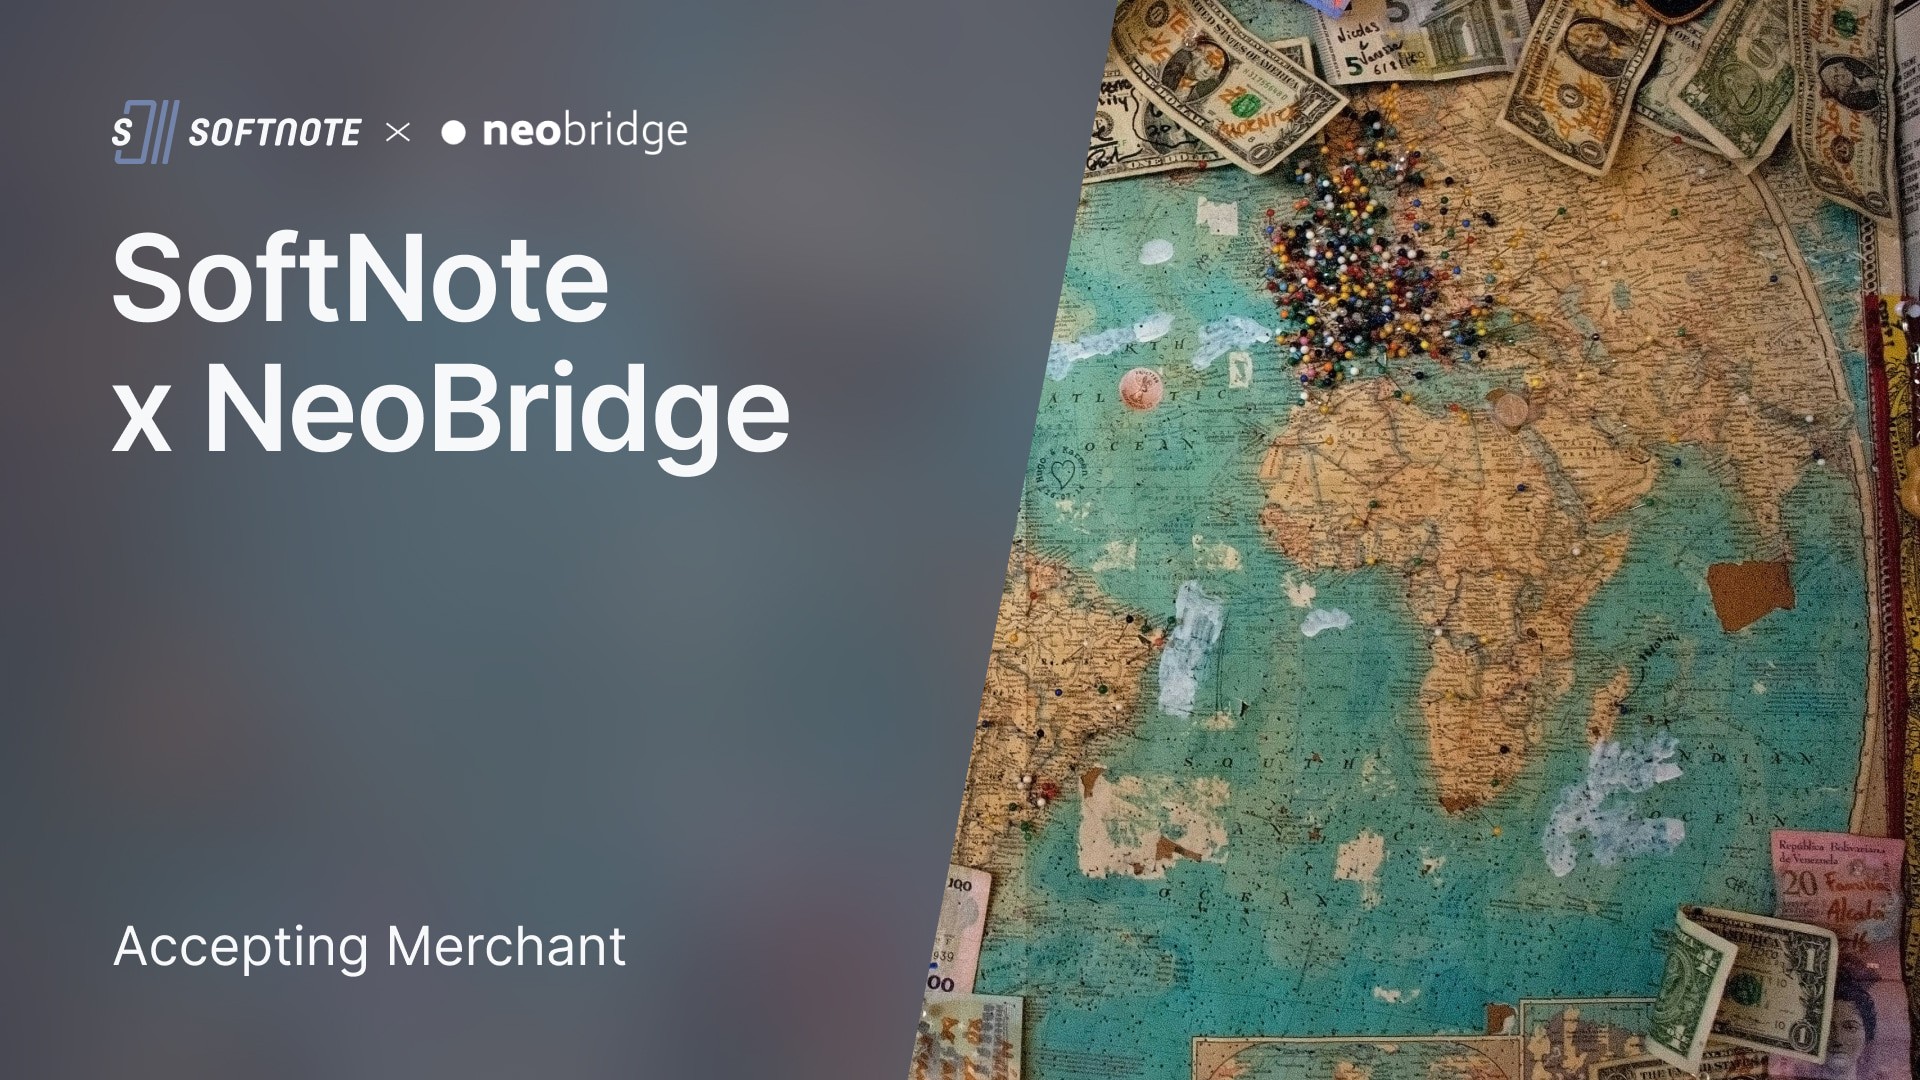 Tectum Onboards NeoBridge Payment Solution as a SoftNote Merchant